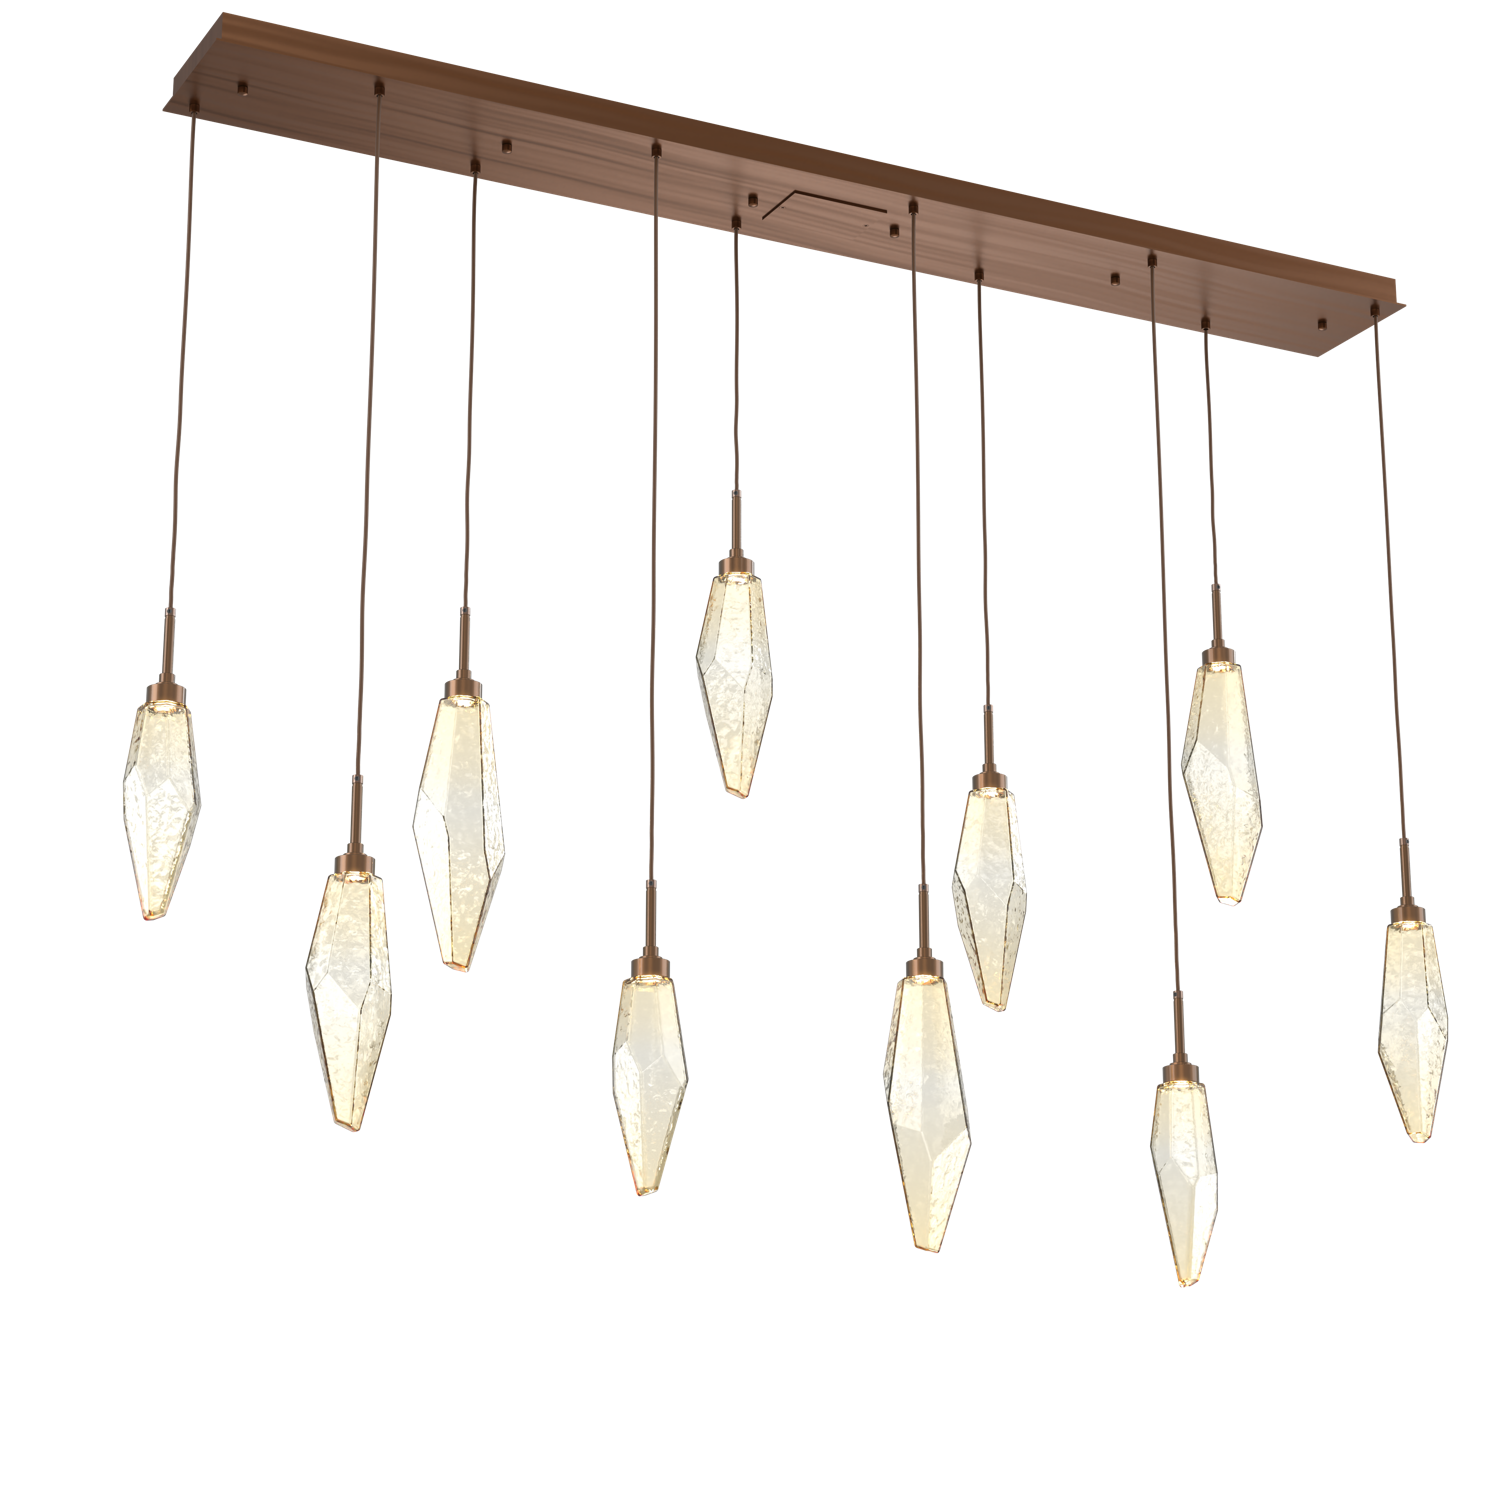 PLB0050-10-RB-CA-Hammerton-Studio-Rock-Crystal-10-light-linear-pendant-chandelier-with-oil-rubbed-bronze-finish-and-chilled-amber-blown-glass-shades-and-LED-lamping